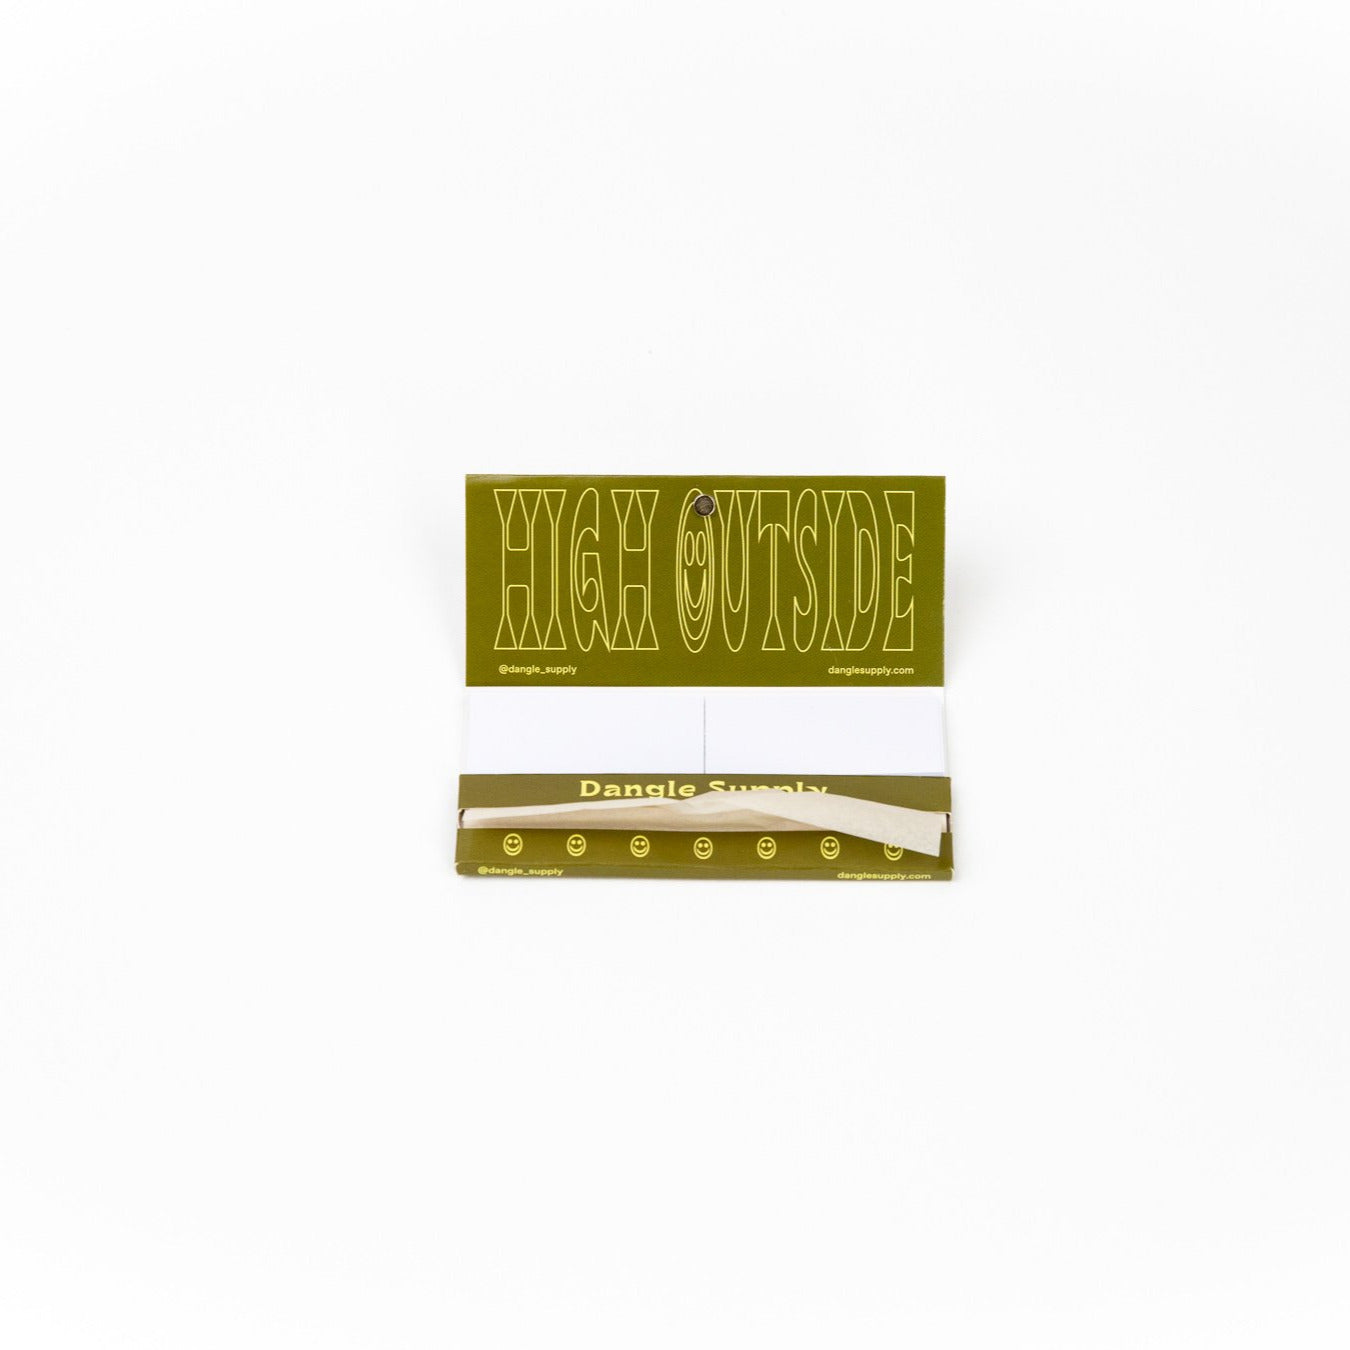 Dangle Supply Rolling Papers